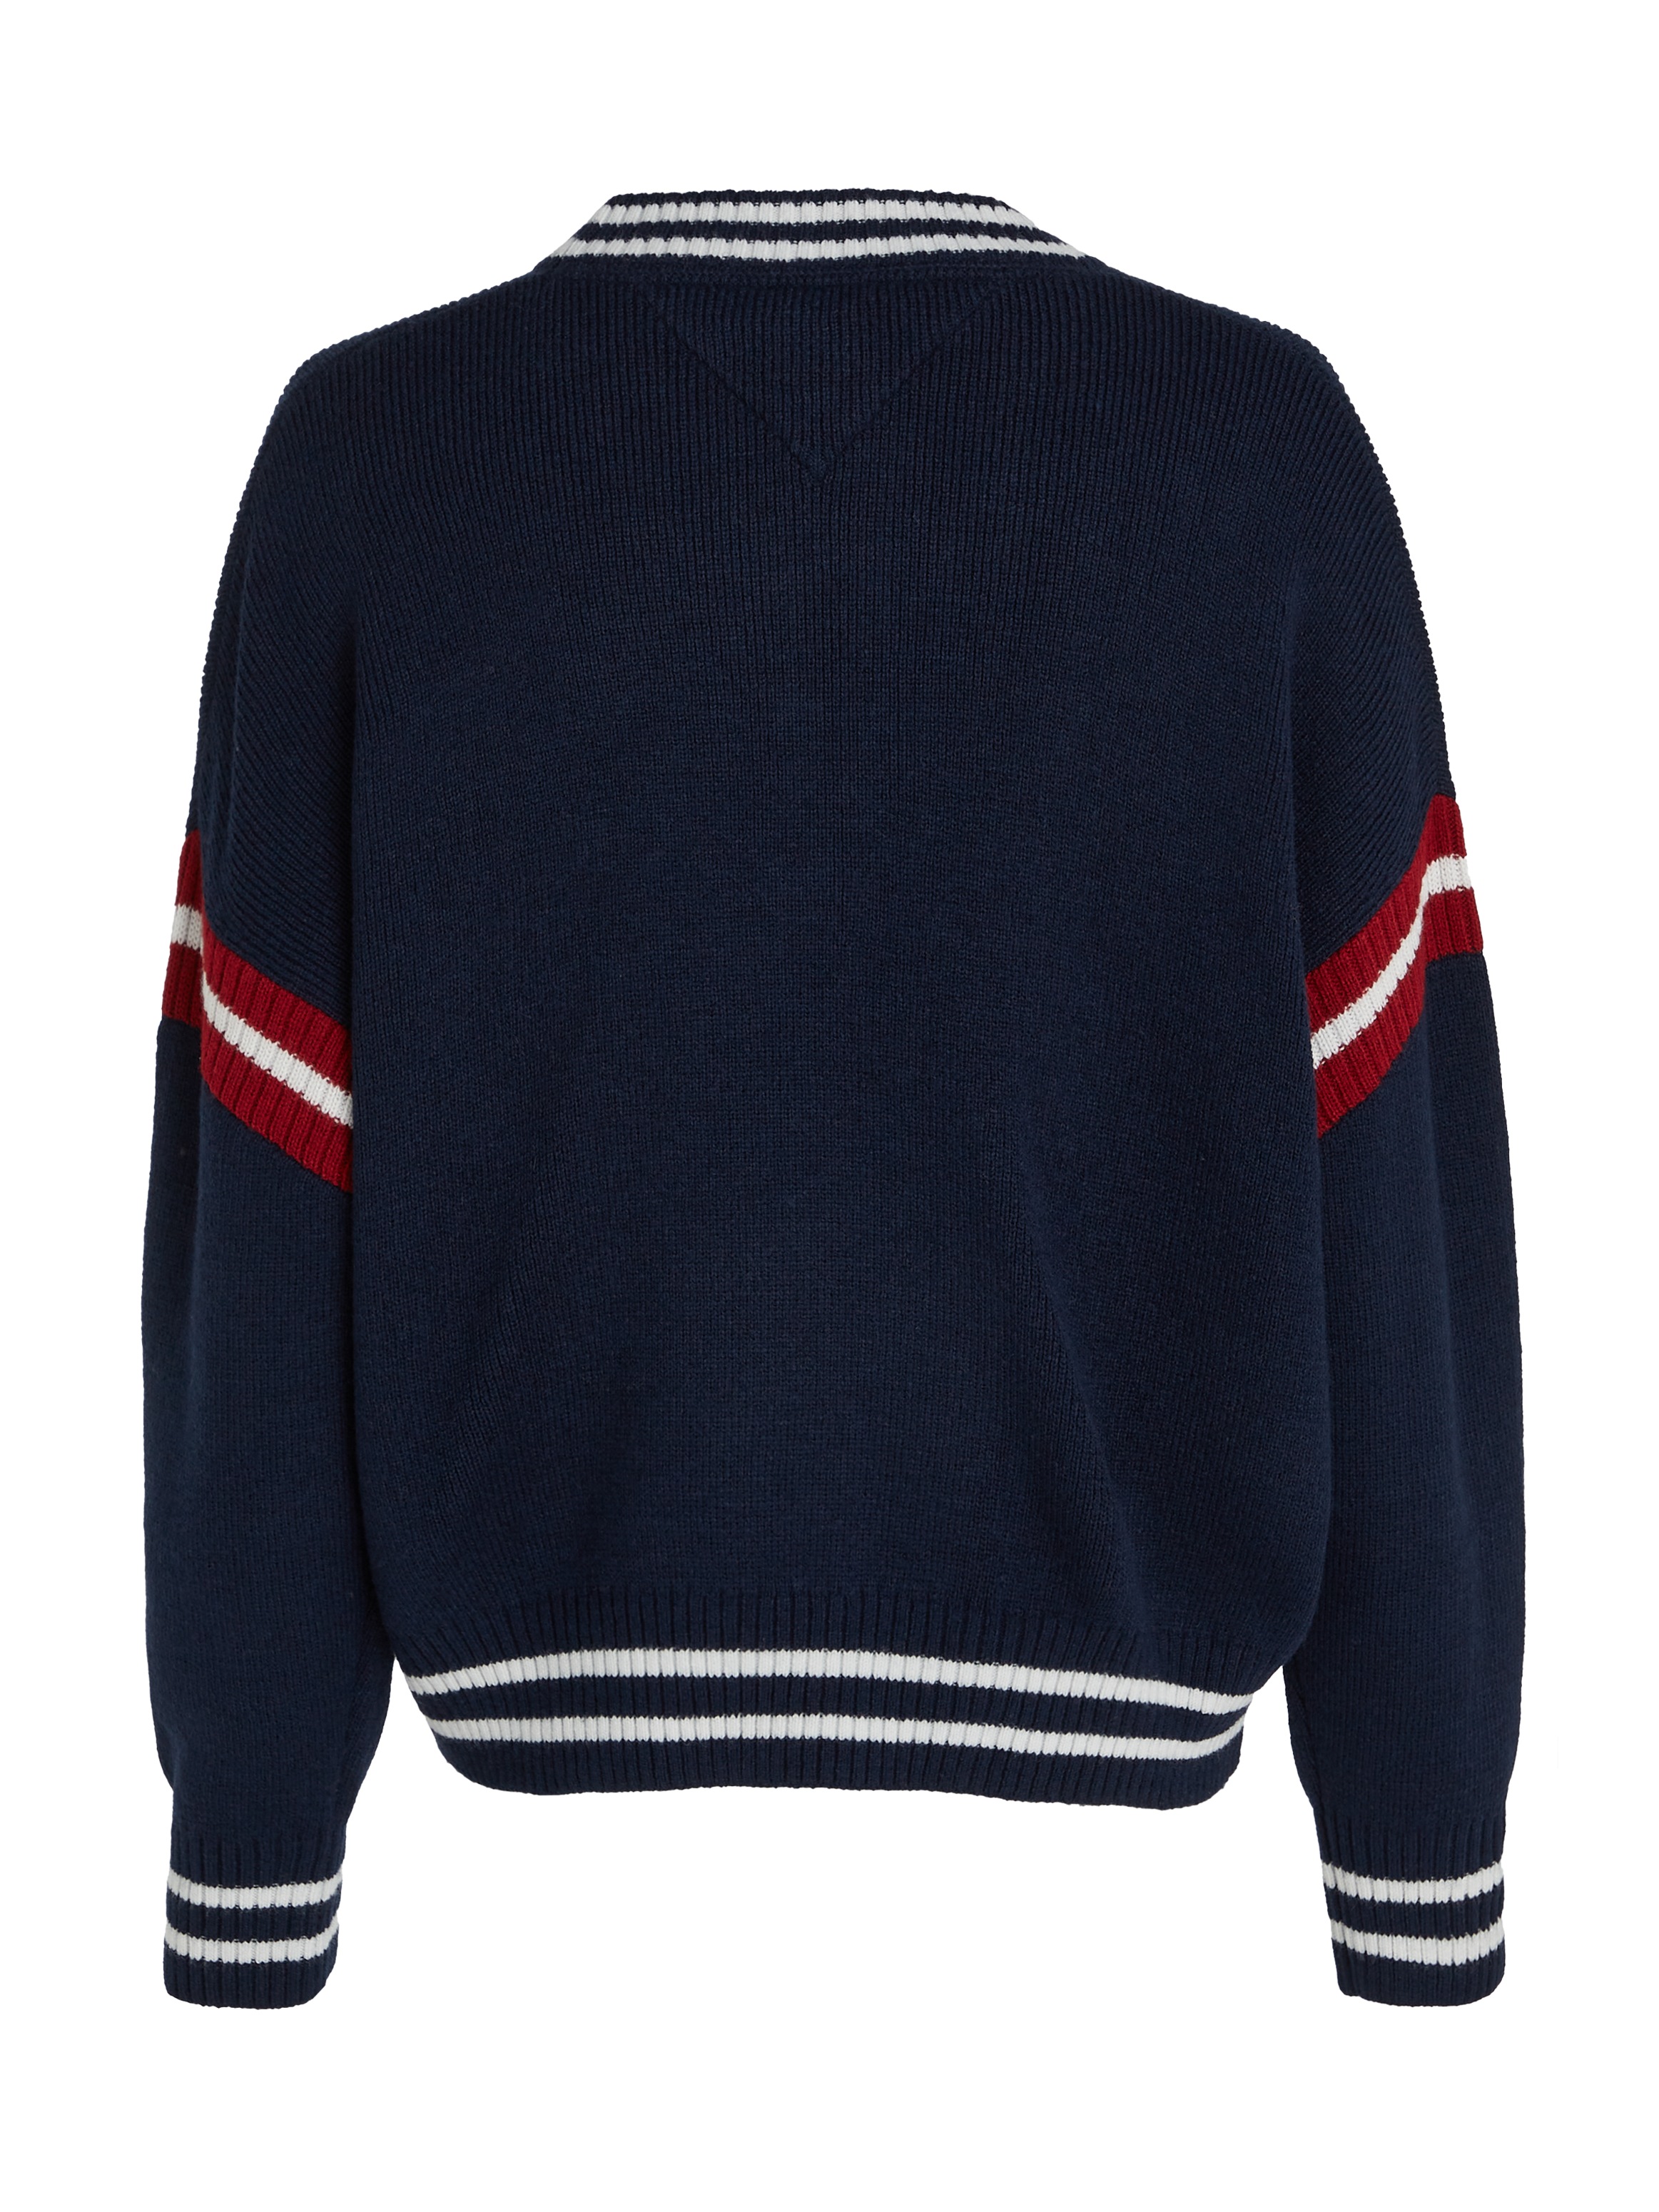 Tommy Jeans Strickpullover »TJW LETTERMAN SWEATER«, mit gestickter Tommy Jeans Flagge